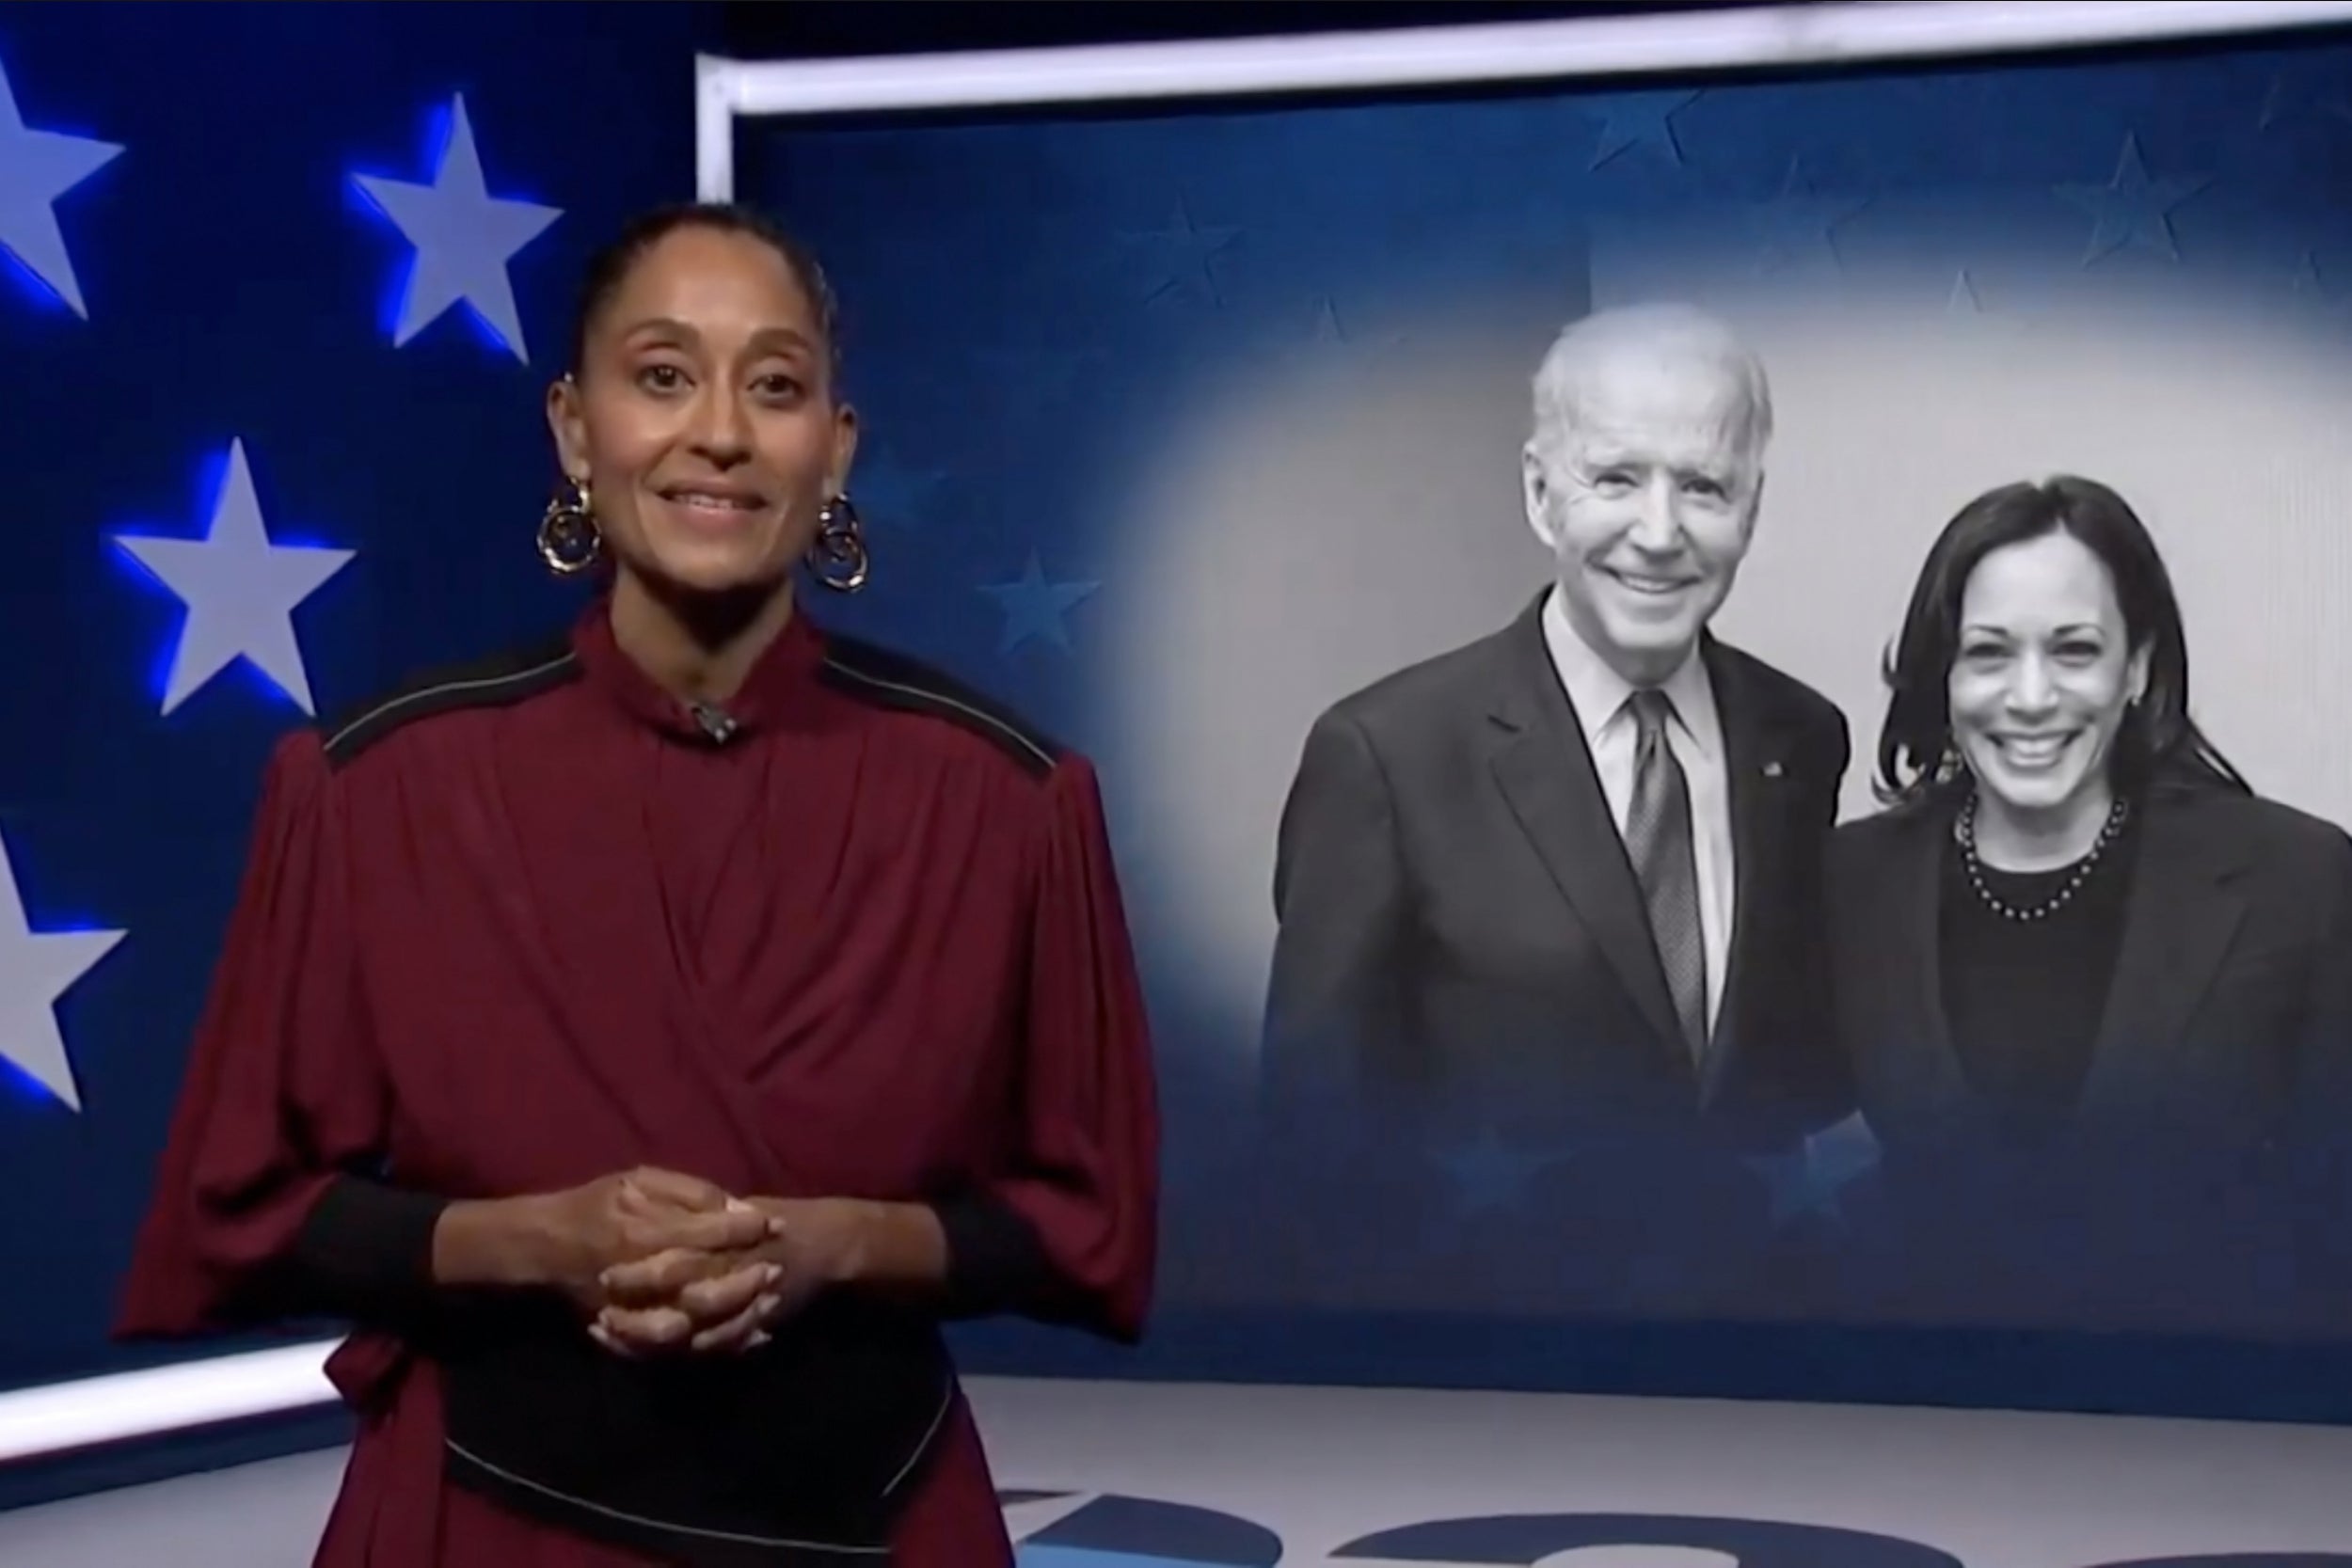 Actress and activist Tracee Ellis Ross speaks in front of photo of Presumptive Democratic presidential nominee former Vice President Joe Biden and Presumptive Democratic vice presidential nominee Kamala Harris at the Democratic National Convention